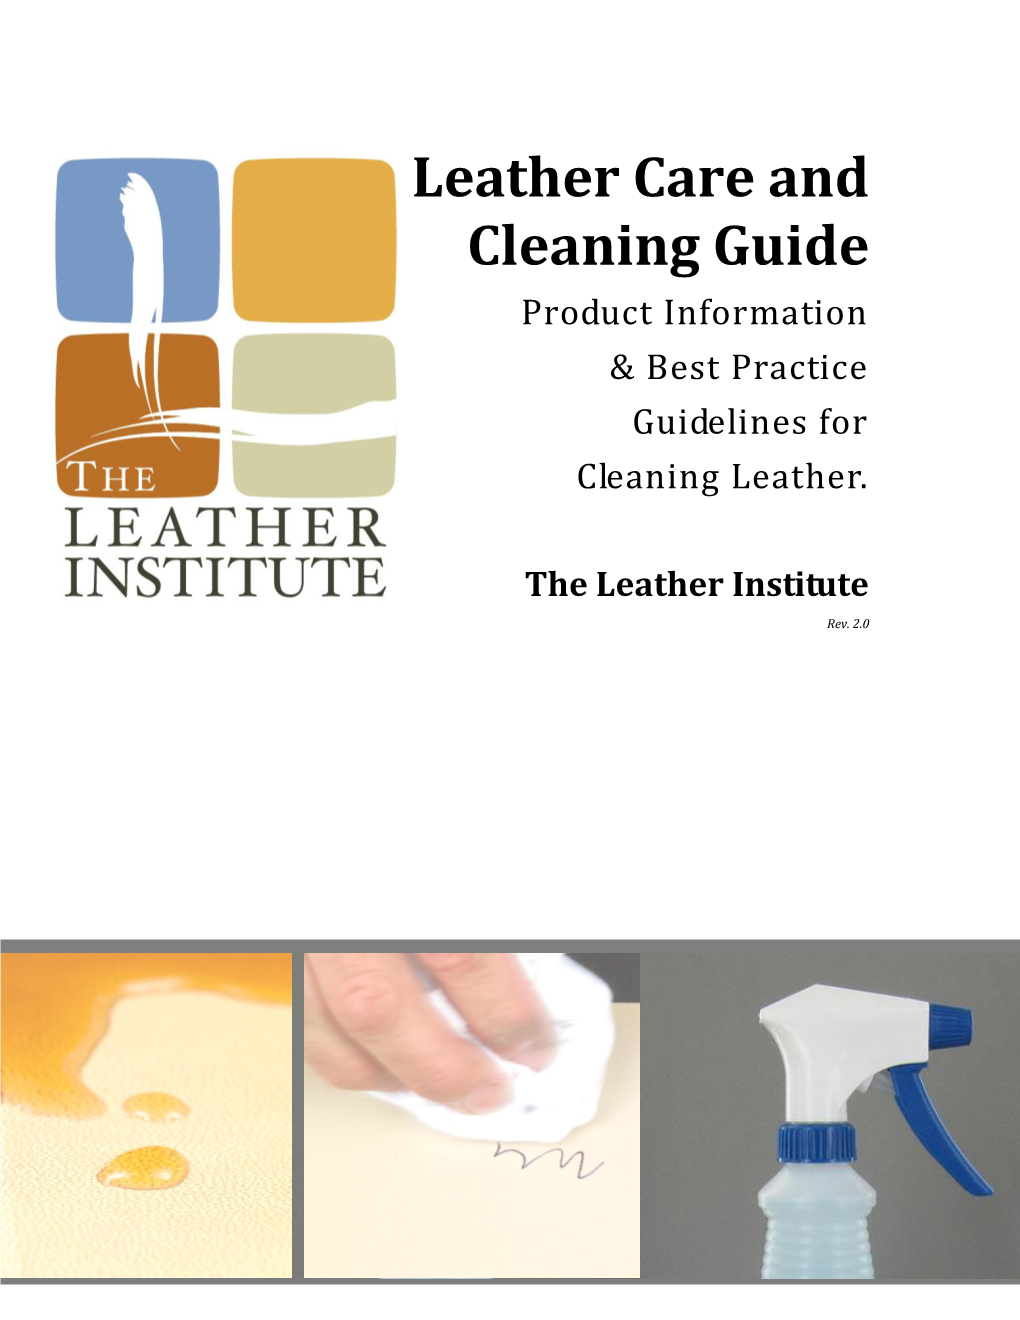 Leather Care and Cleaning Guide Product Information